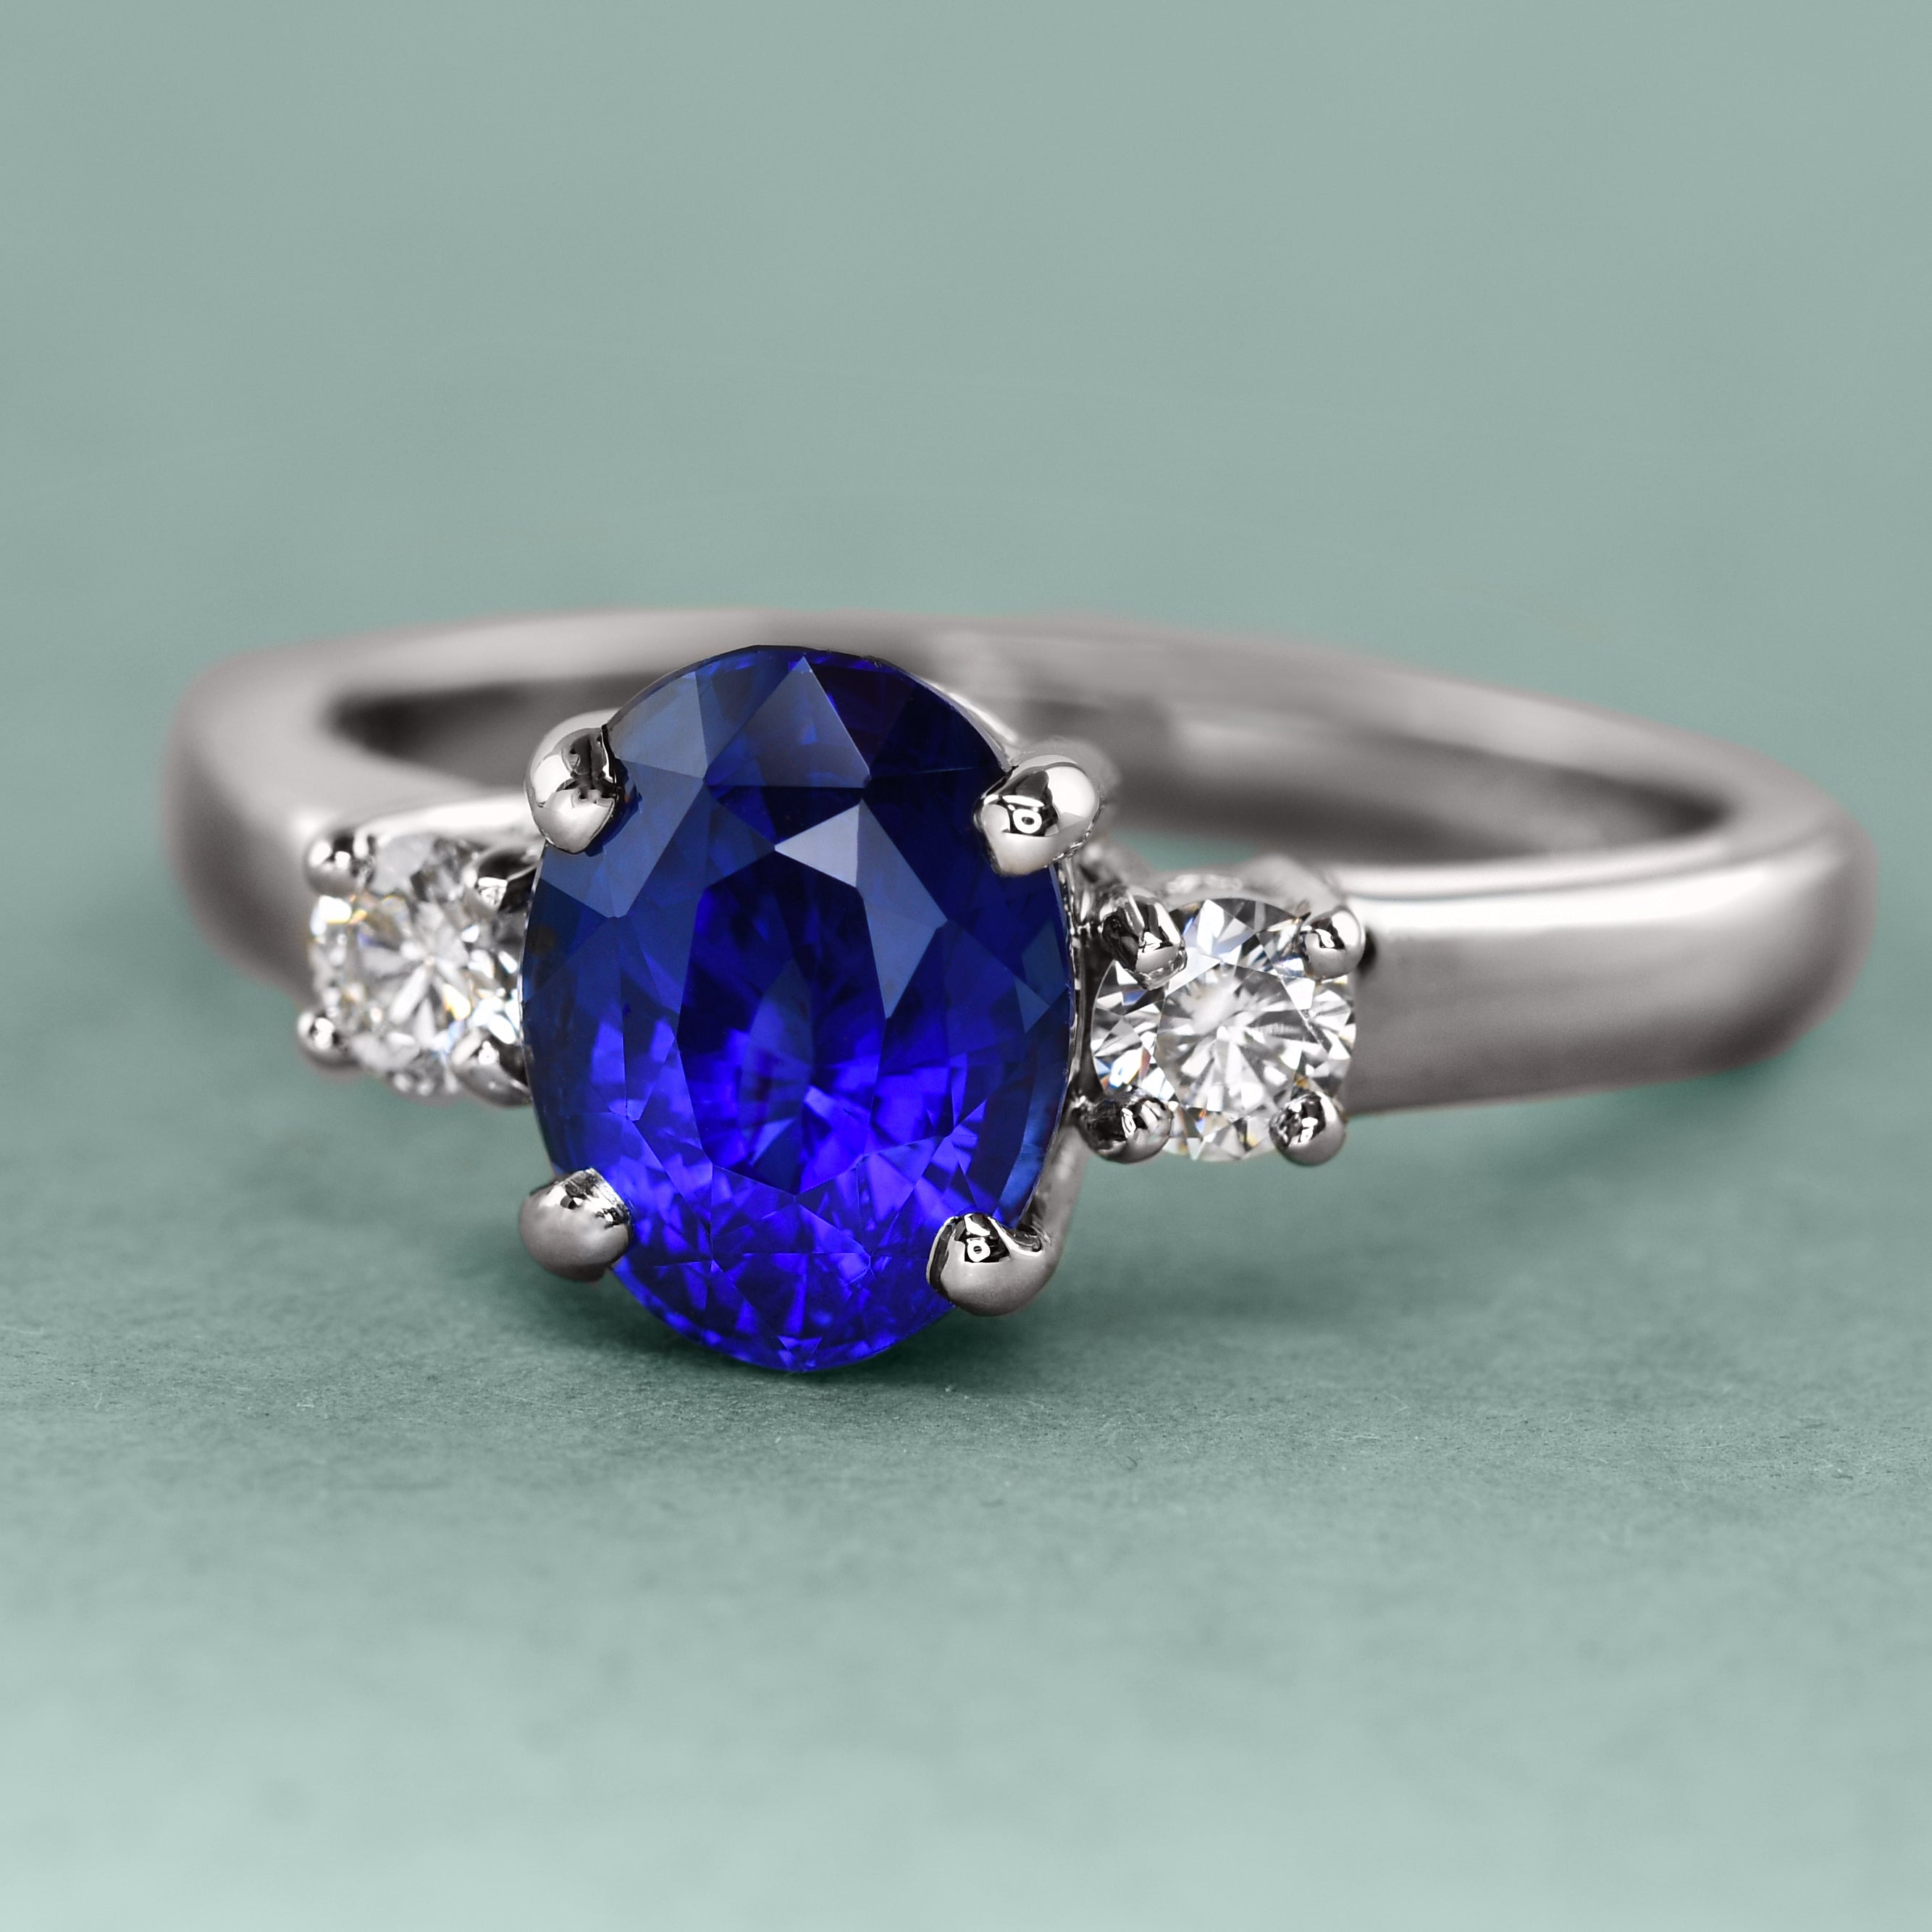 Sapphire Birthstone Ring - Designs by Aaron